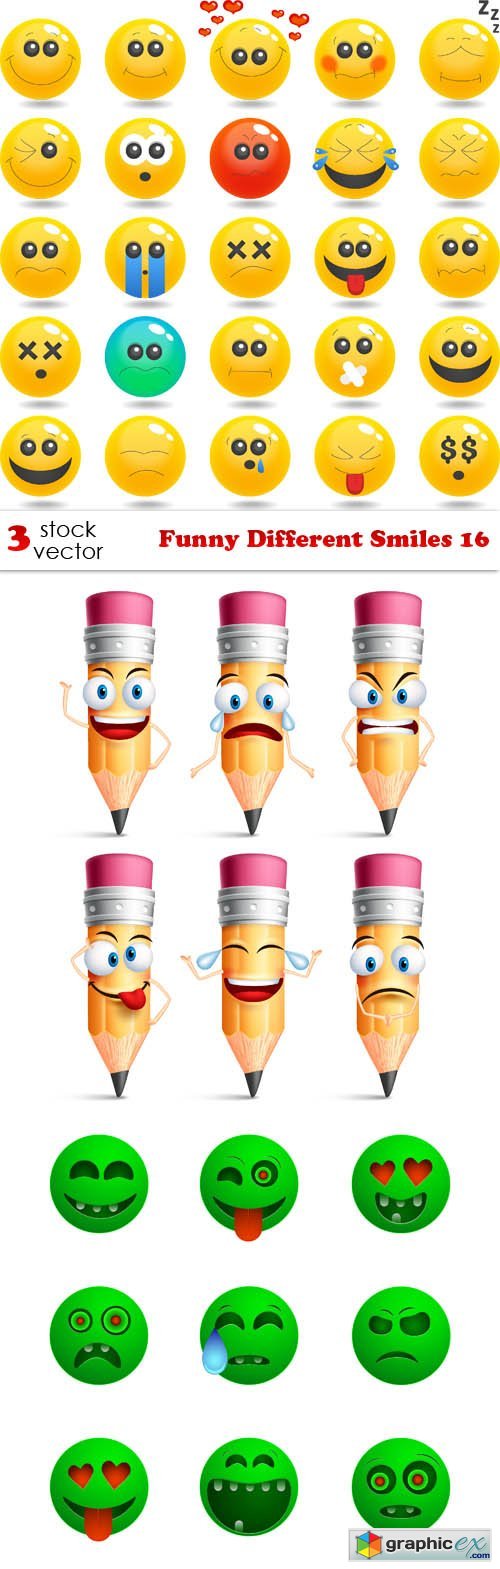 Funny Different Smiles 16